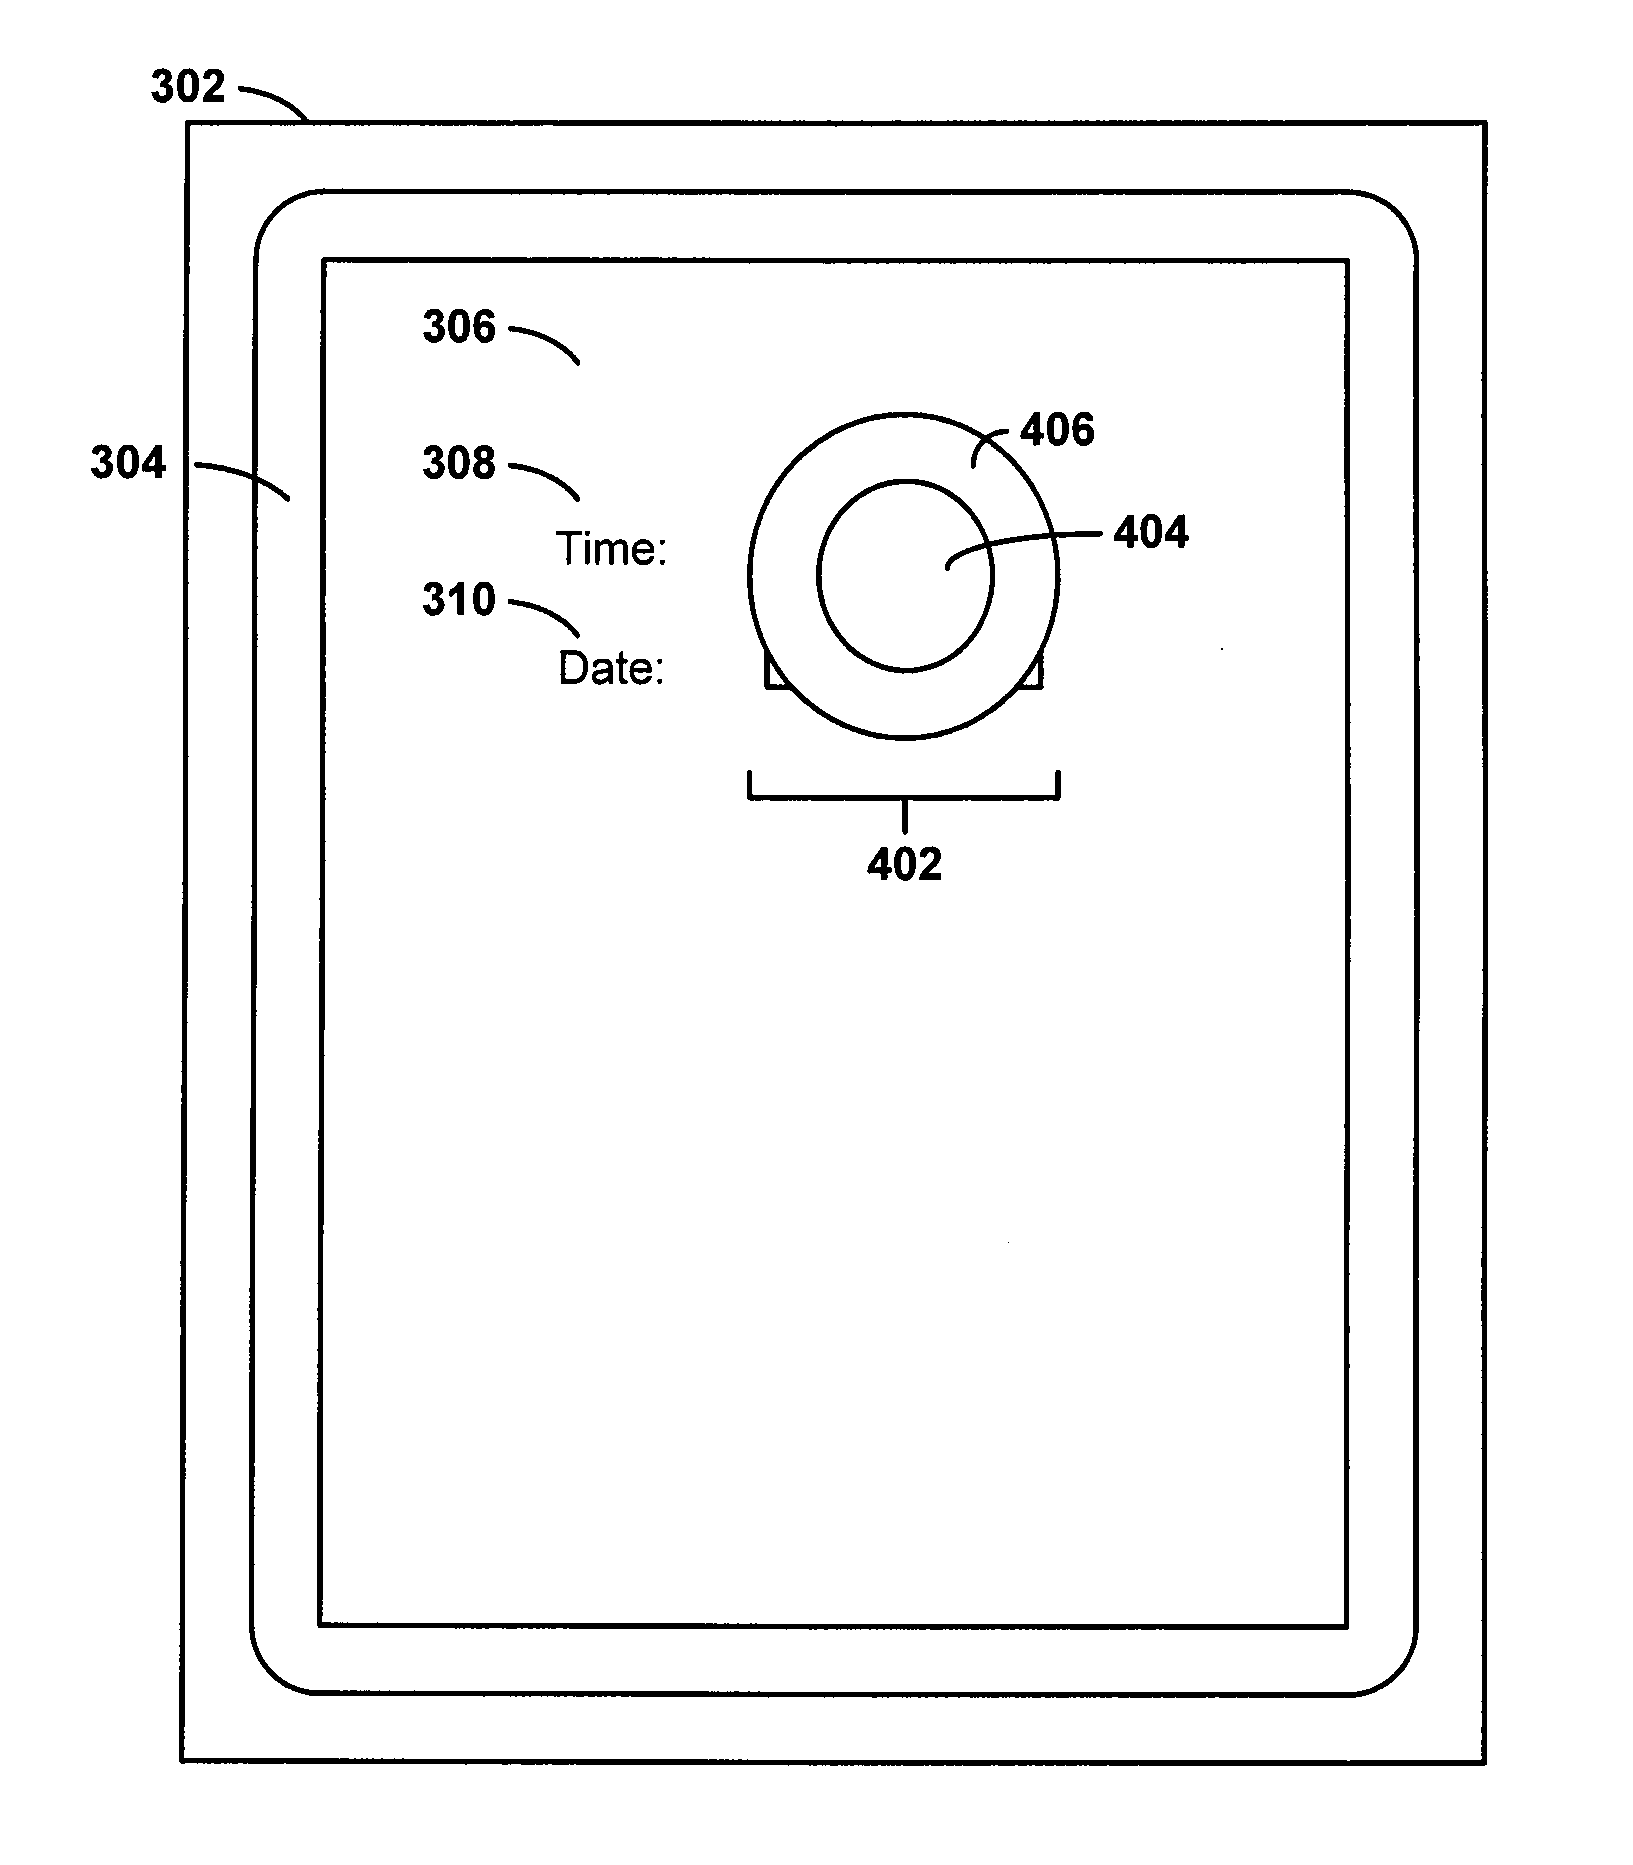 Touch-enabled circle control for time and date entry